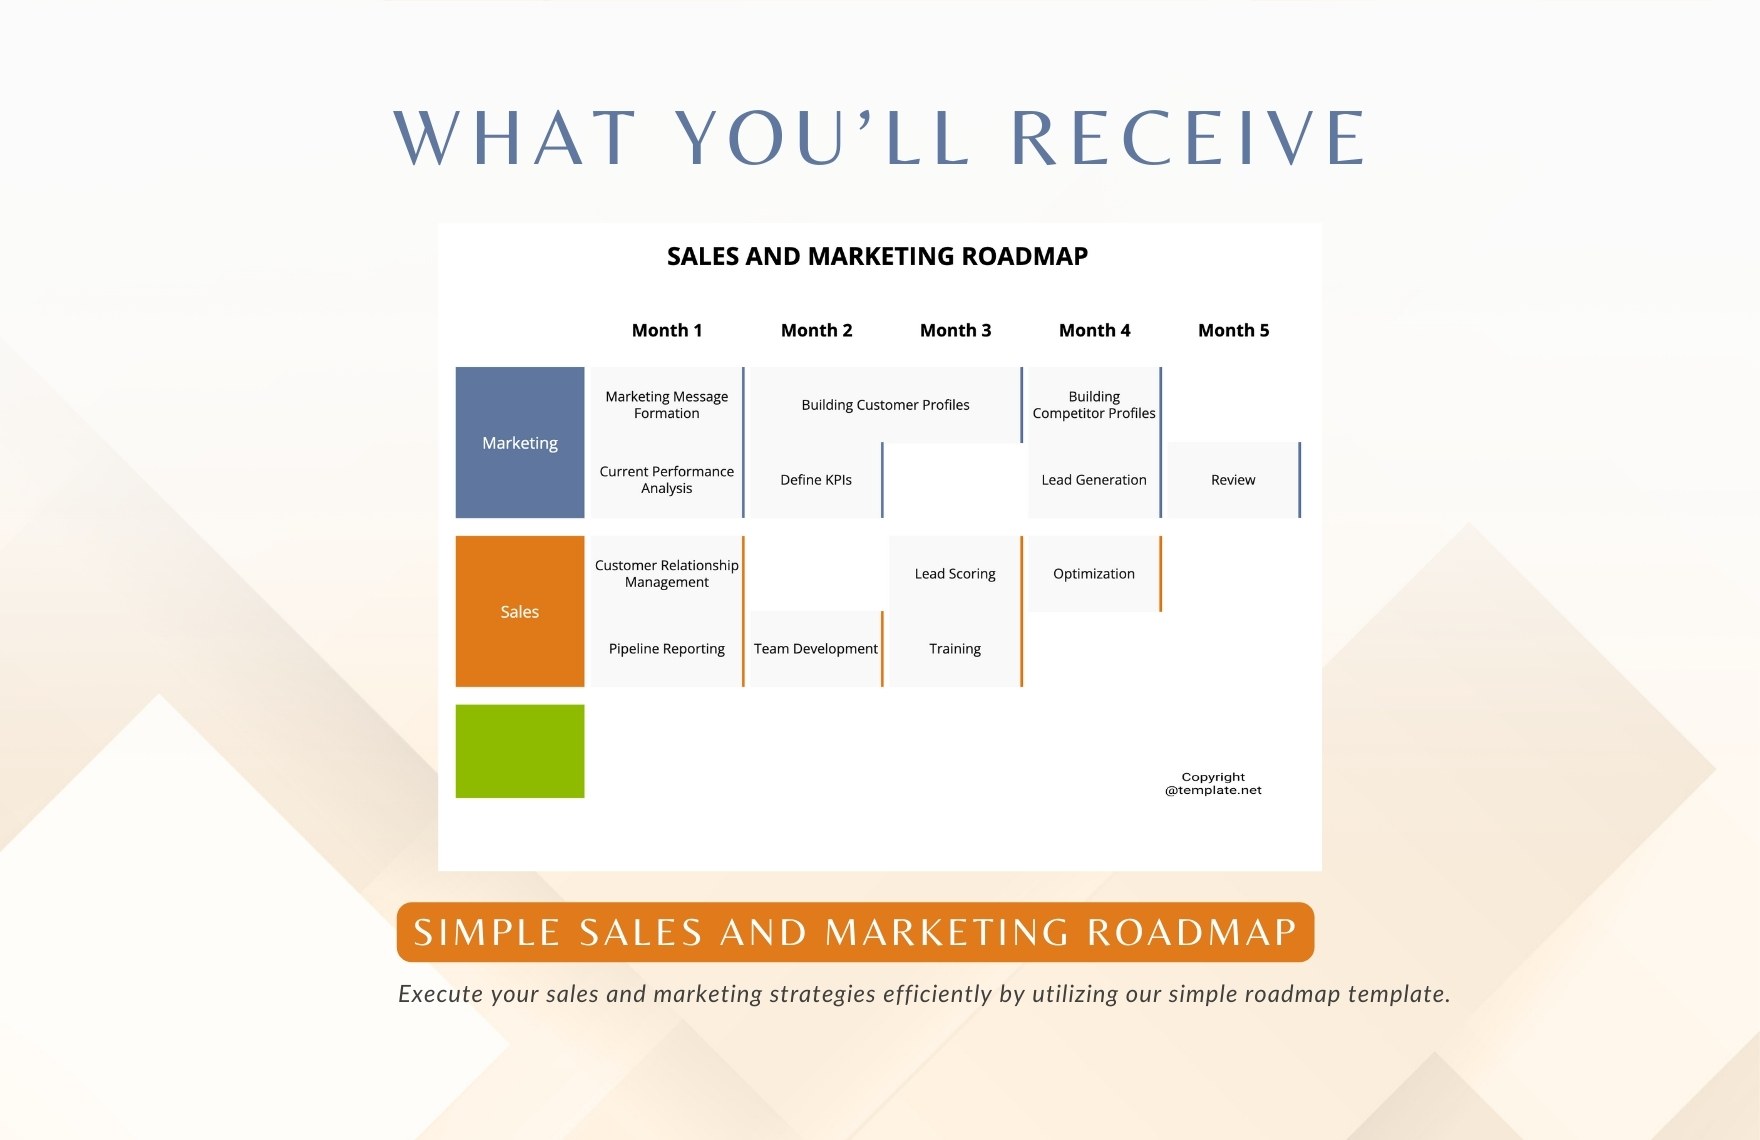 Simple Sales and Marketing Roadmap Template